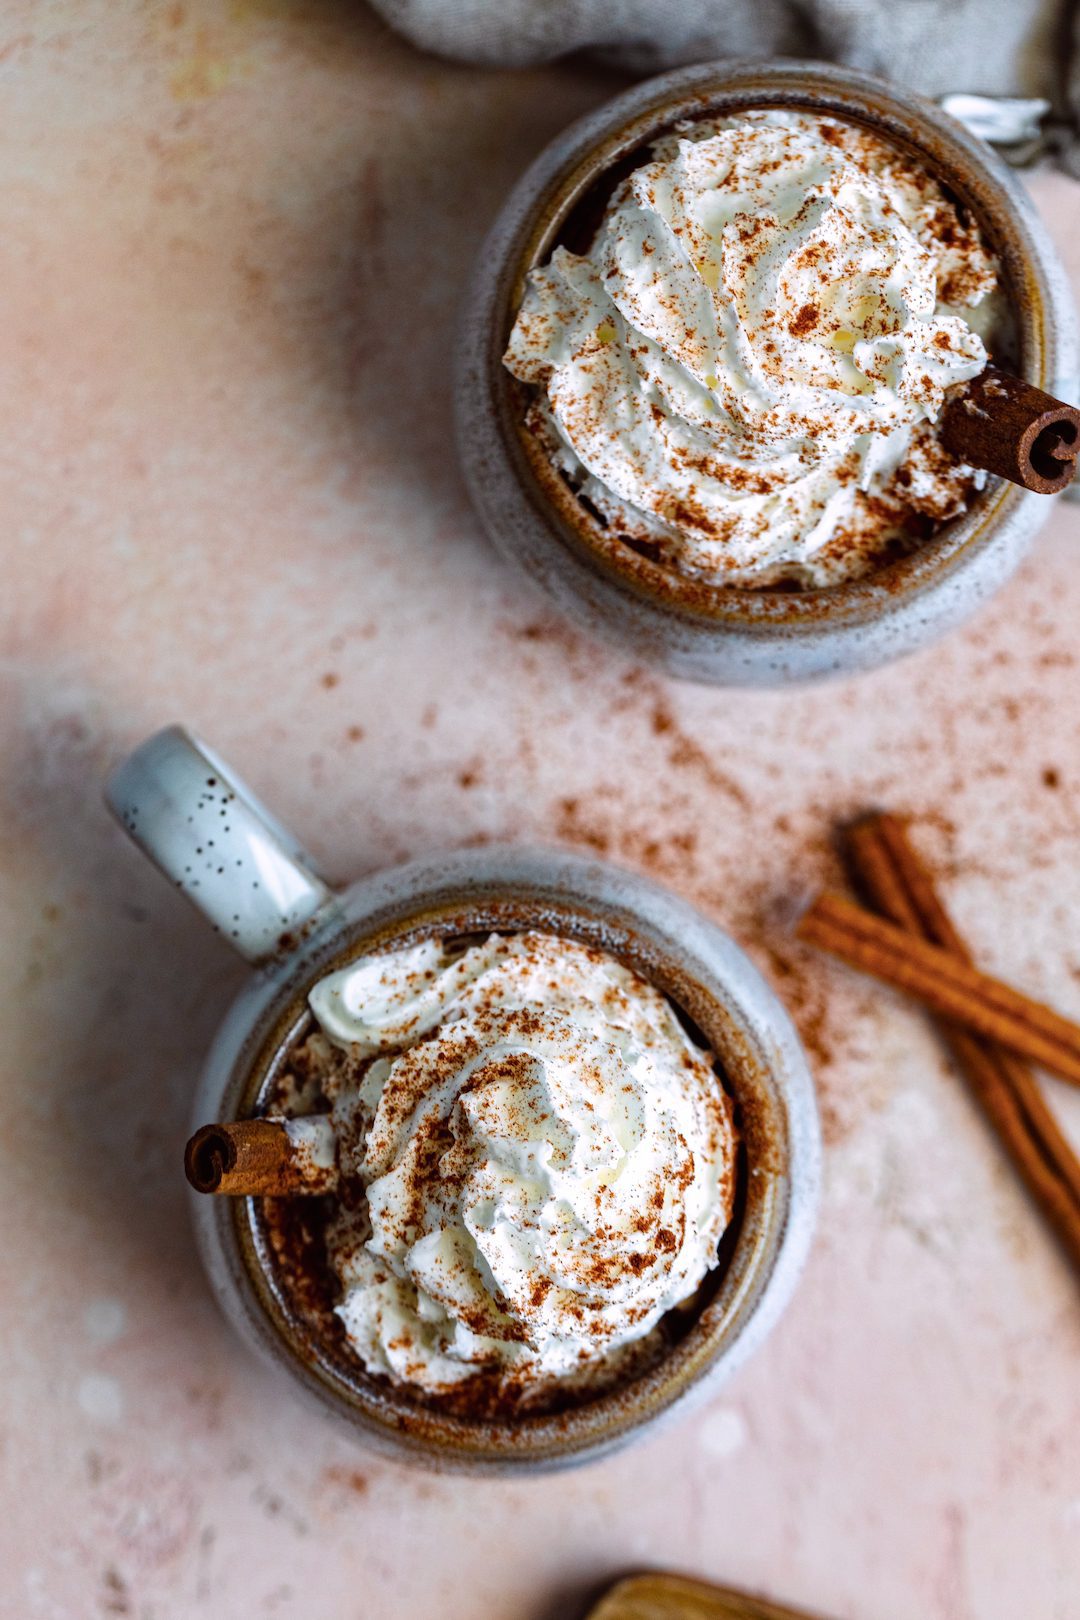 Spiked hot chocolate